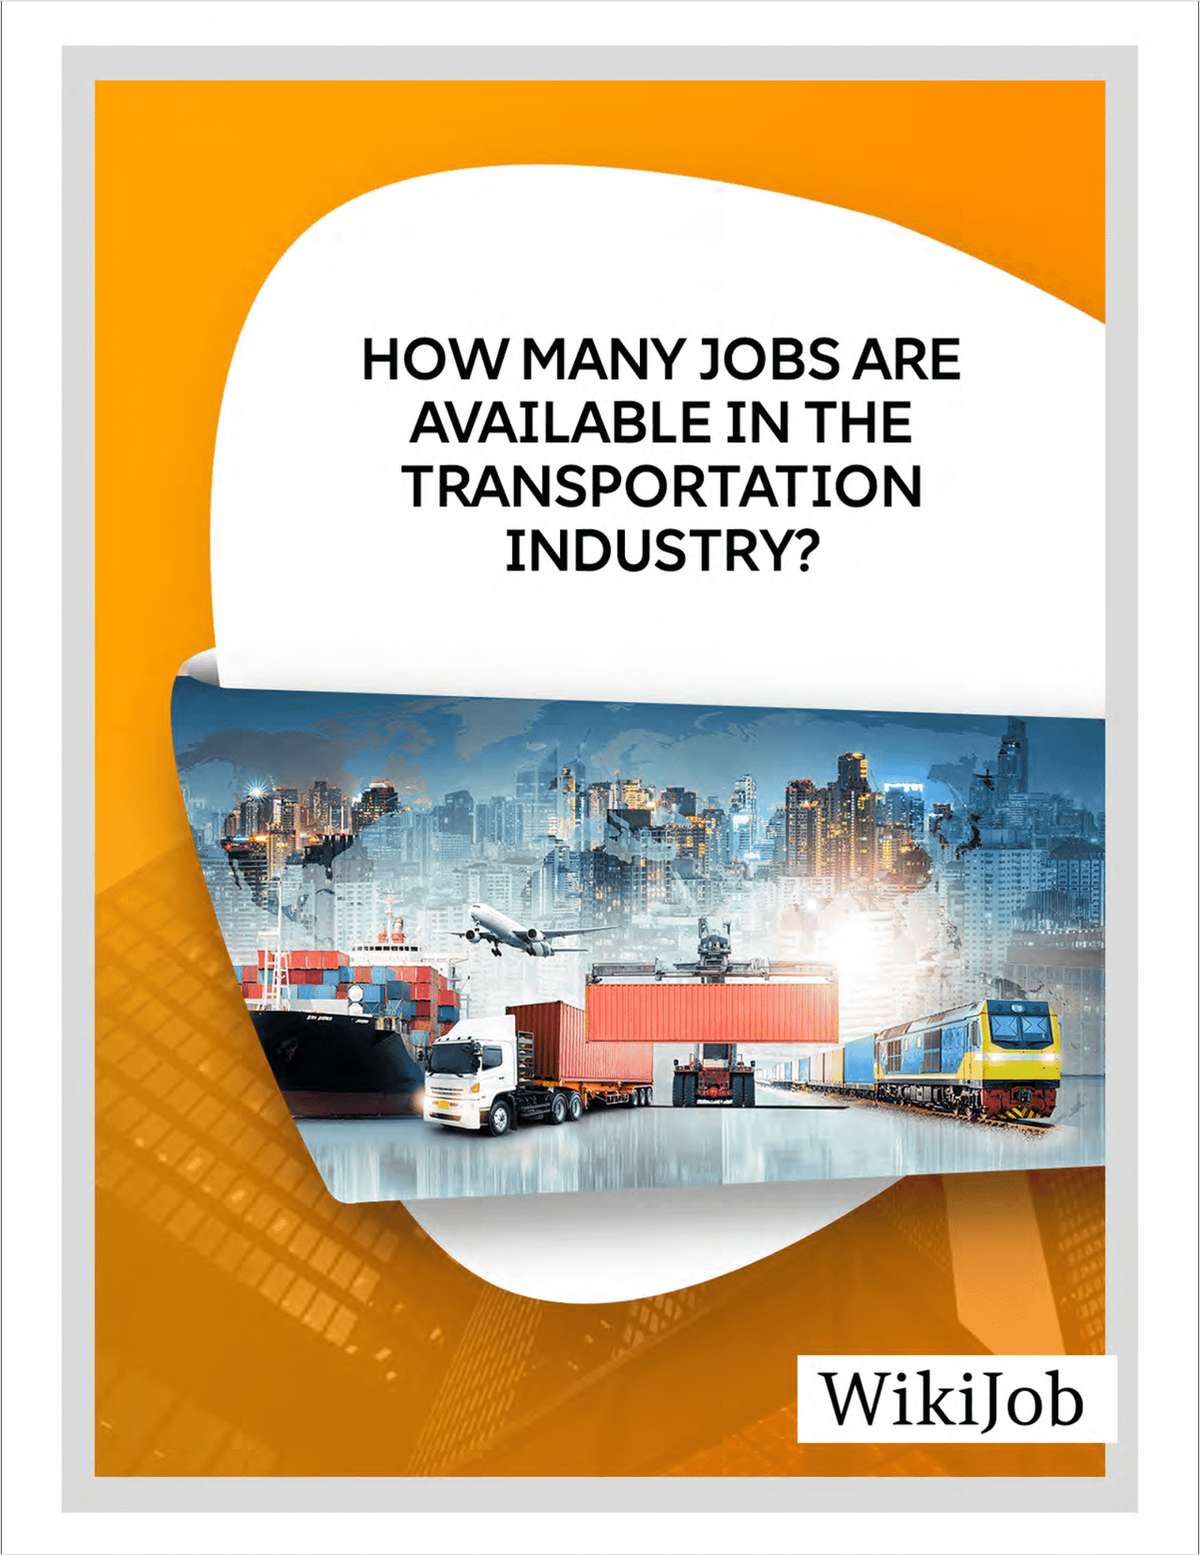 How Many Jobs Are Available in the Transportation Industry?